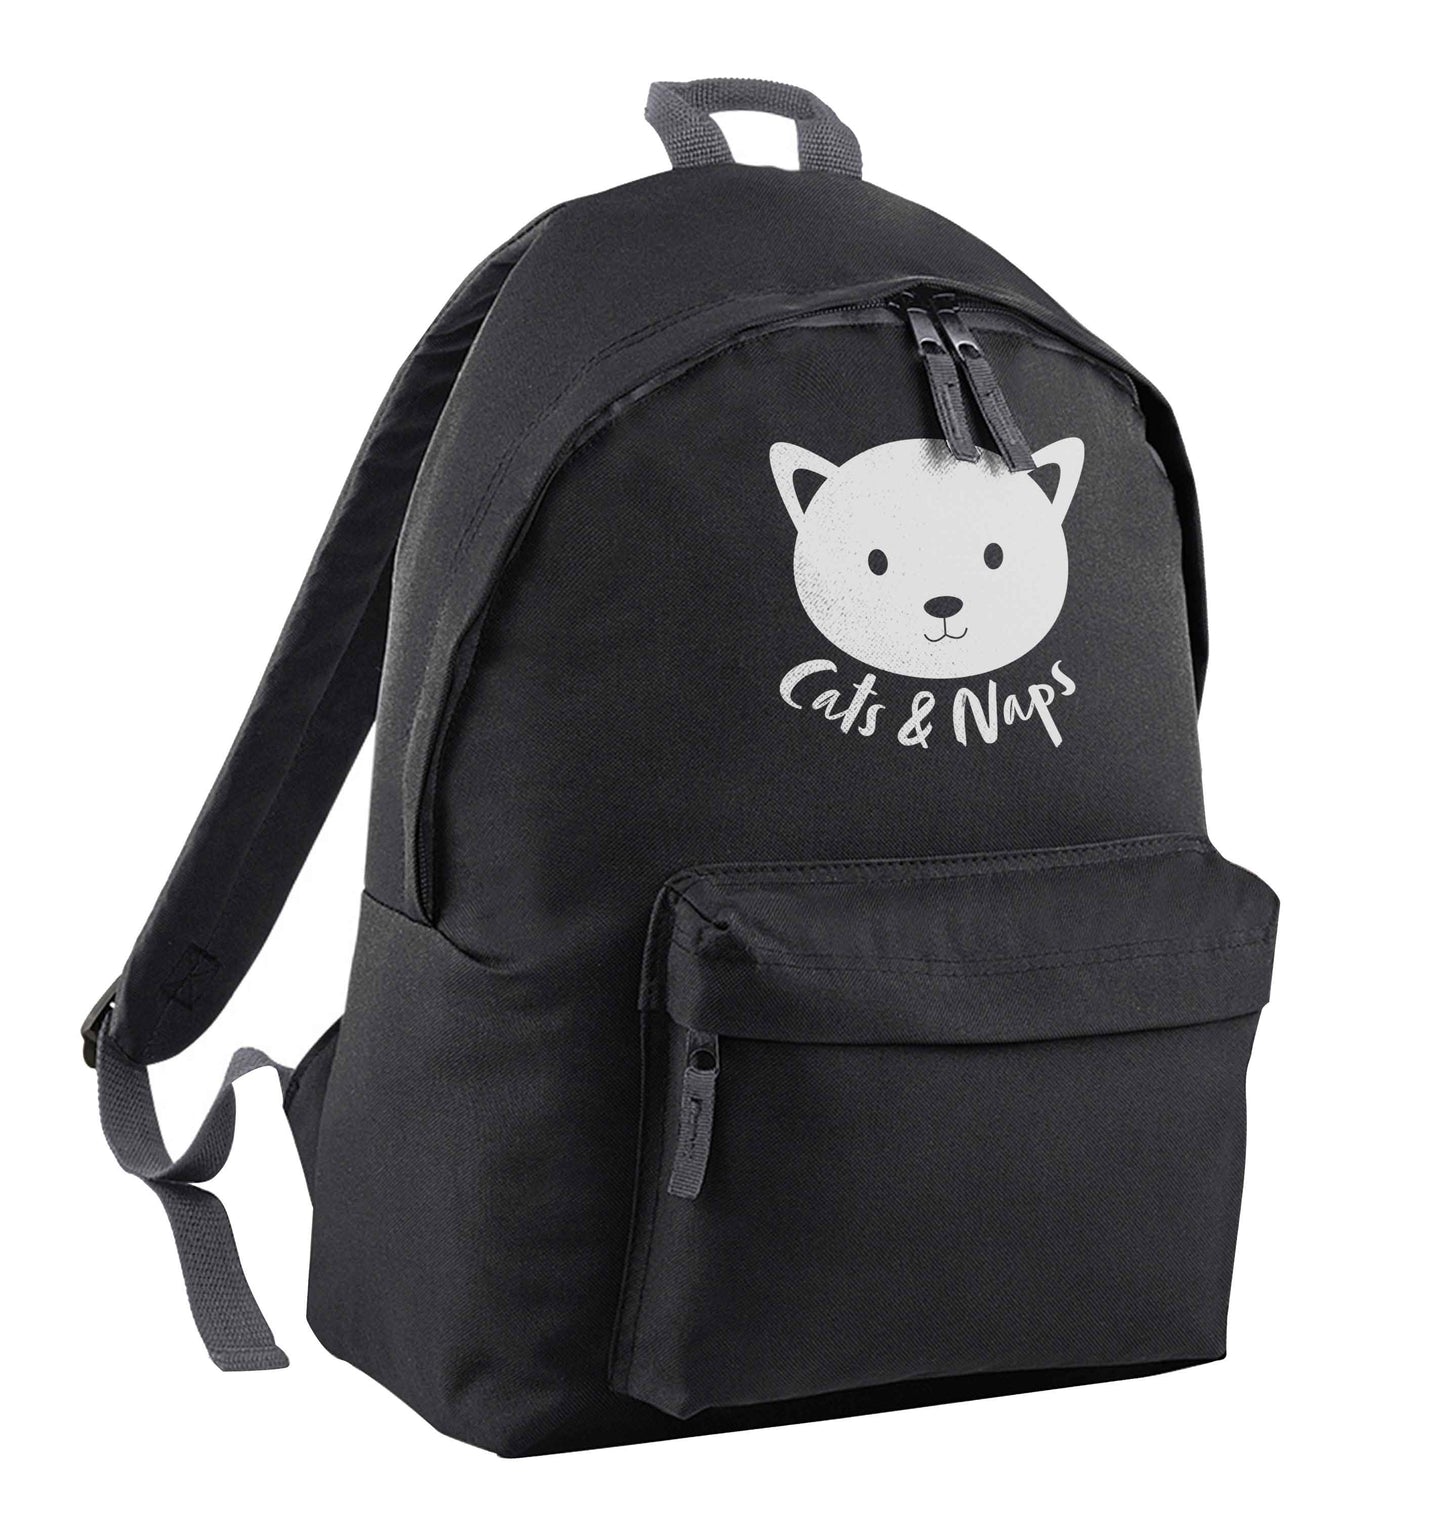 Cats and naps Kit black children's backpack